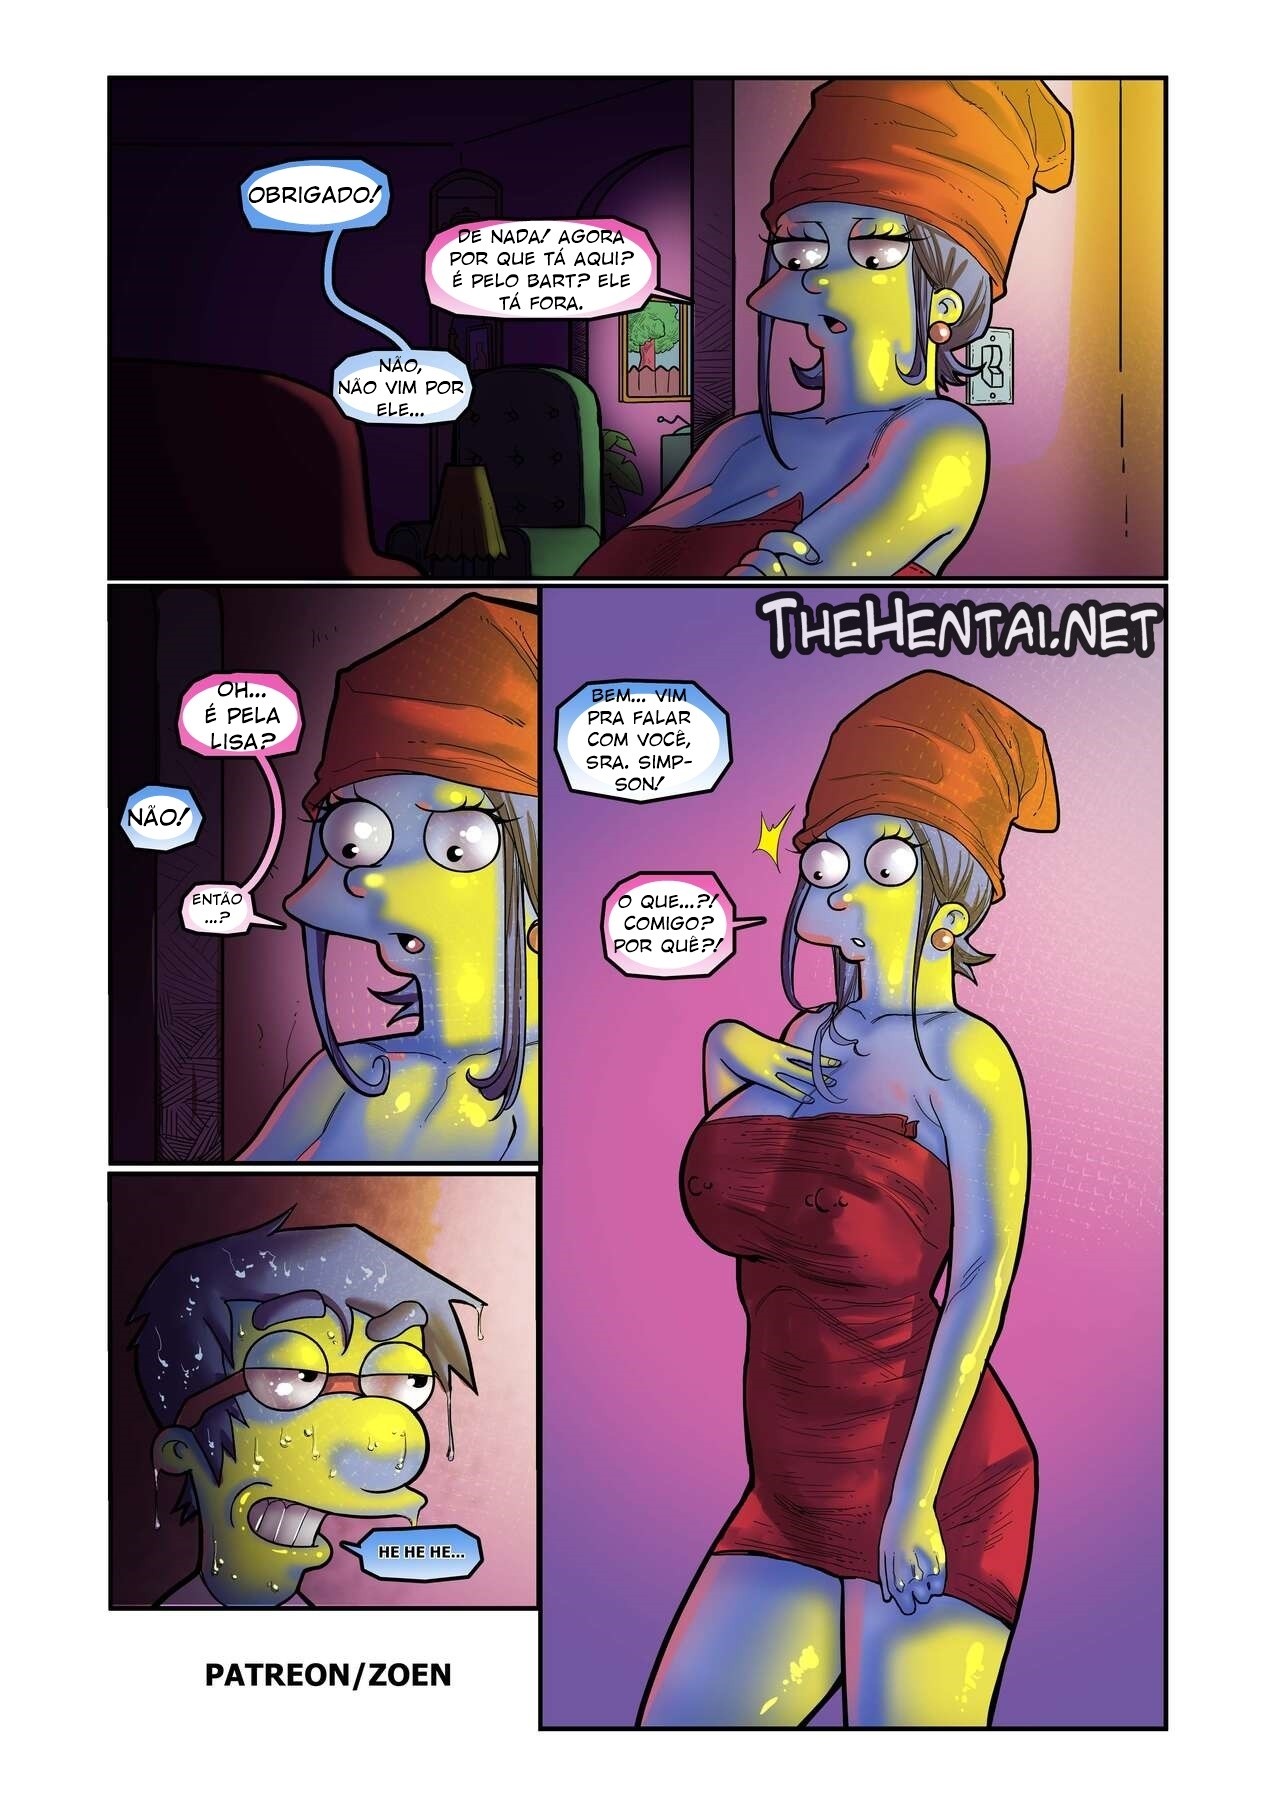 The Simpsons ”My Best Friend’s Mom” Hentai pt-br 27